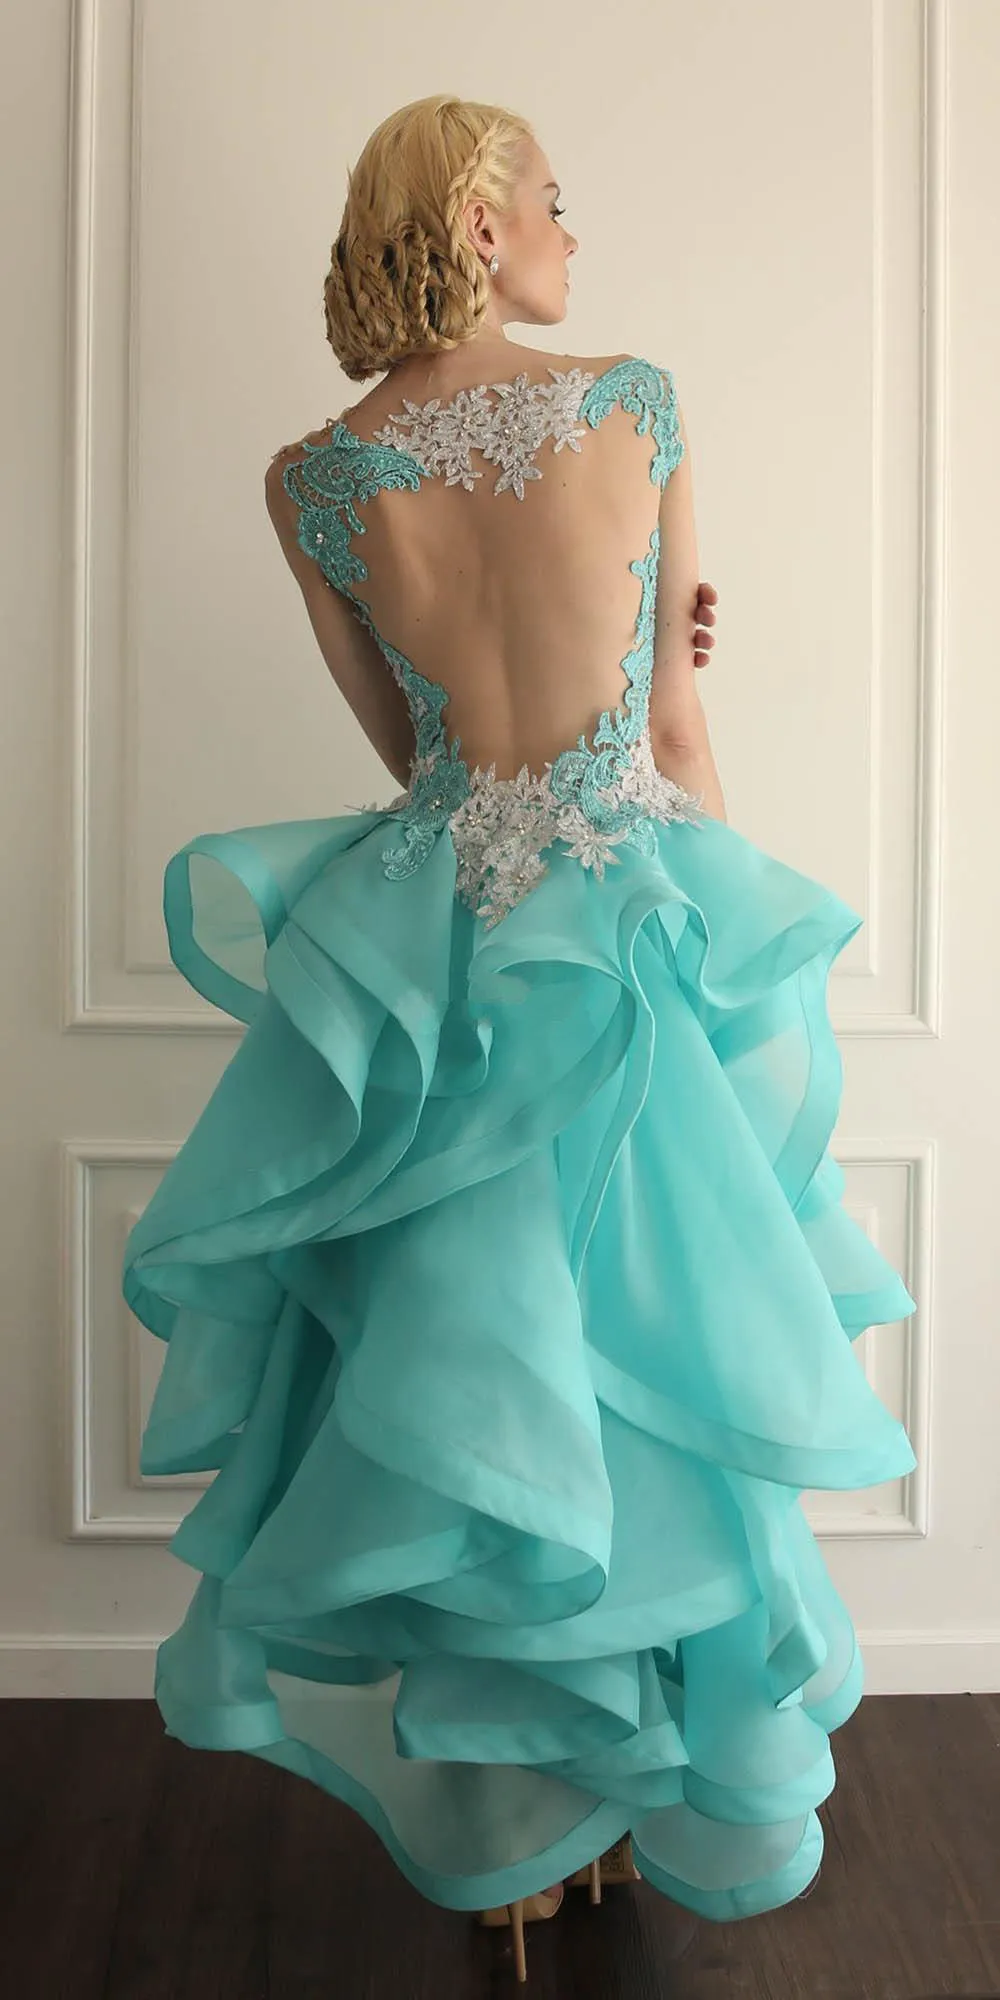 Jewel Sheer Neckline High Low Short Homecoming Dresses Turquoise Prom Gowns With Lace Applique Backless Ruffles Cocktail Gowns Cus8862325